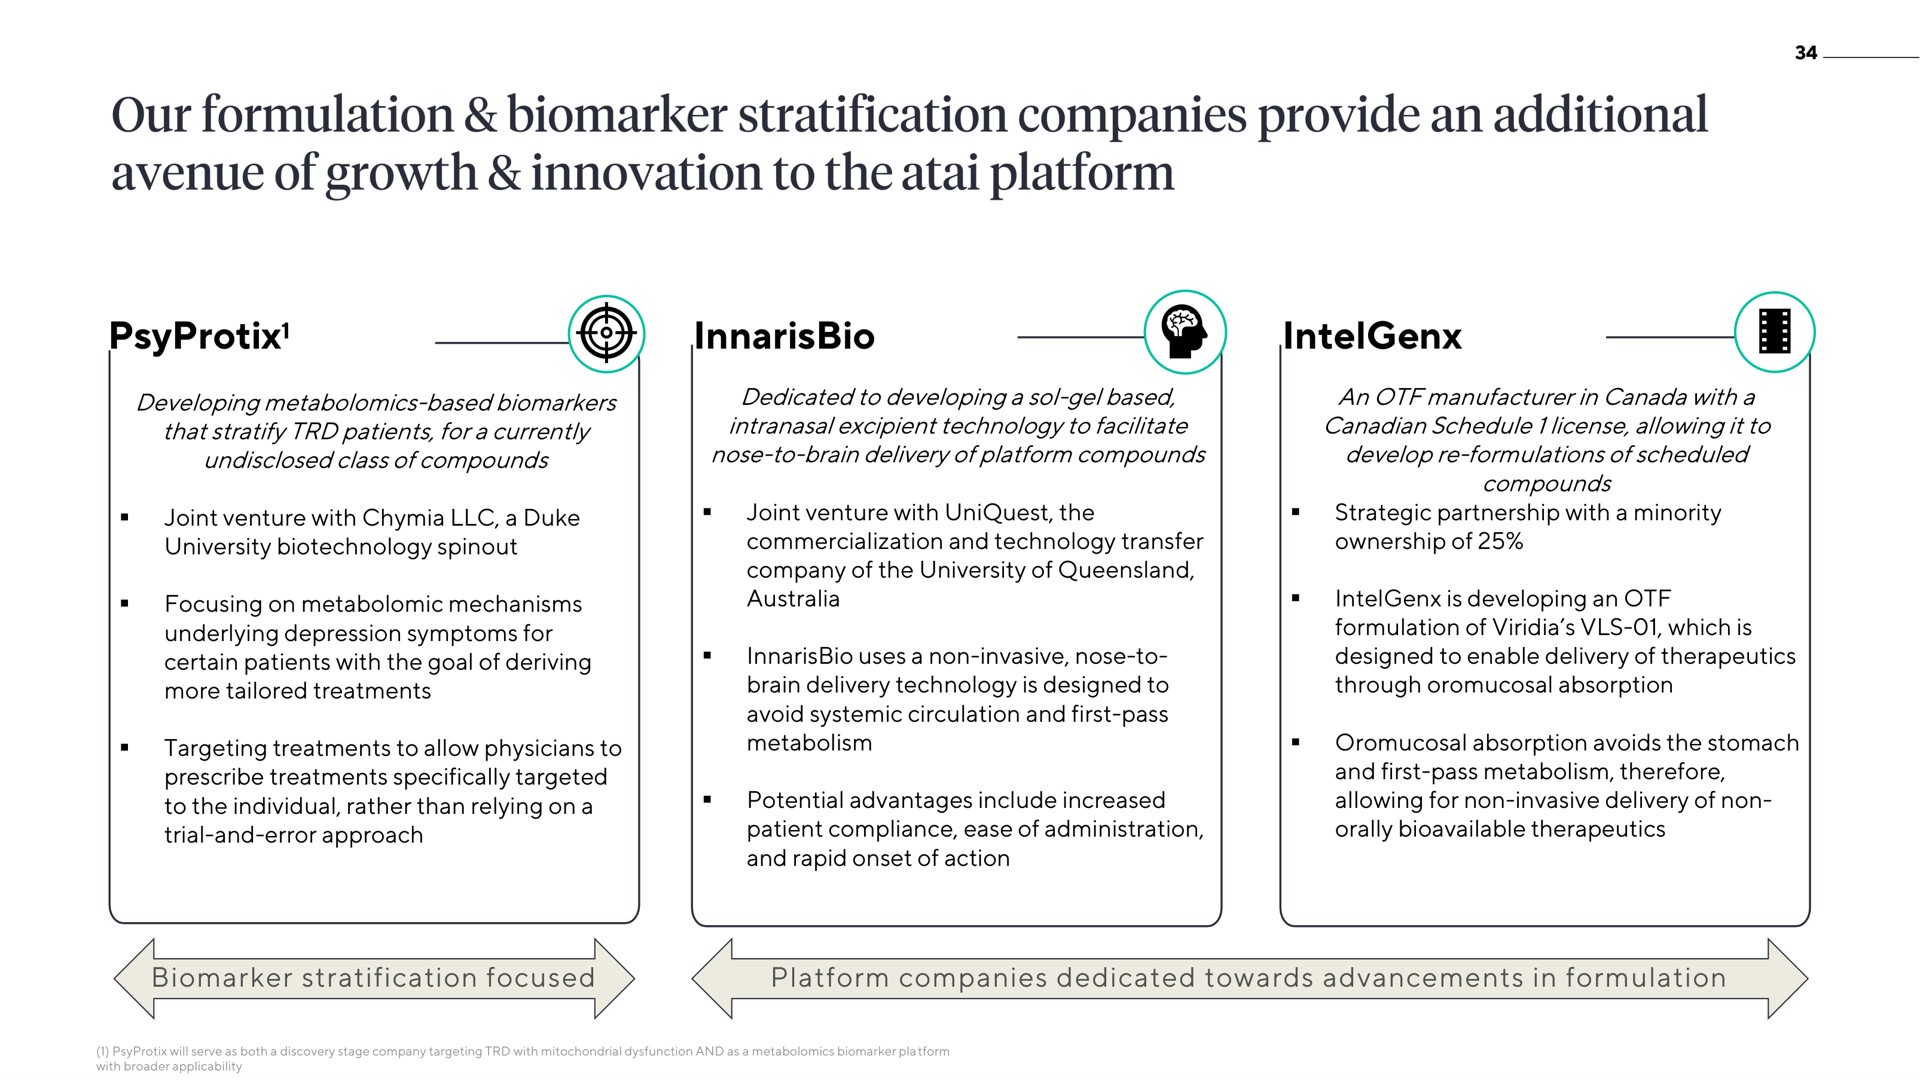 stratification focused platform companies dedicated towards advancements in formulation our provide an additional avenue of growth innovation to the | ATAI